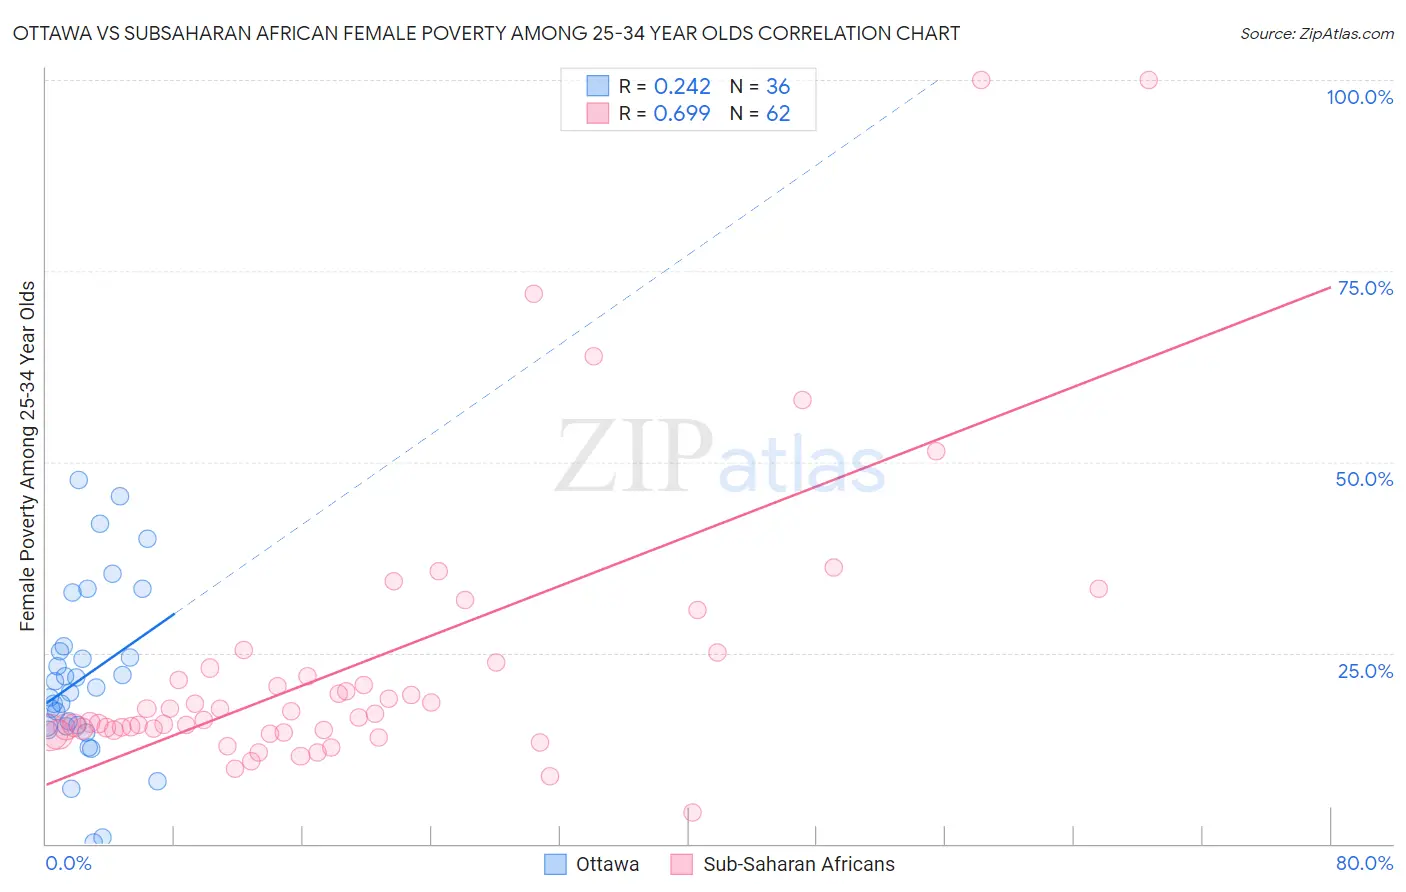 Ottawa vs Subsaharan African Female Poverty Among 25-34 Year Olds